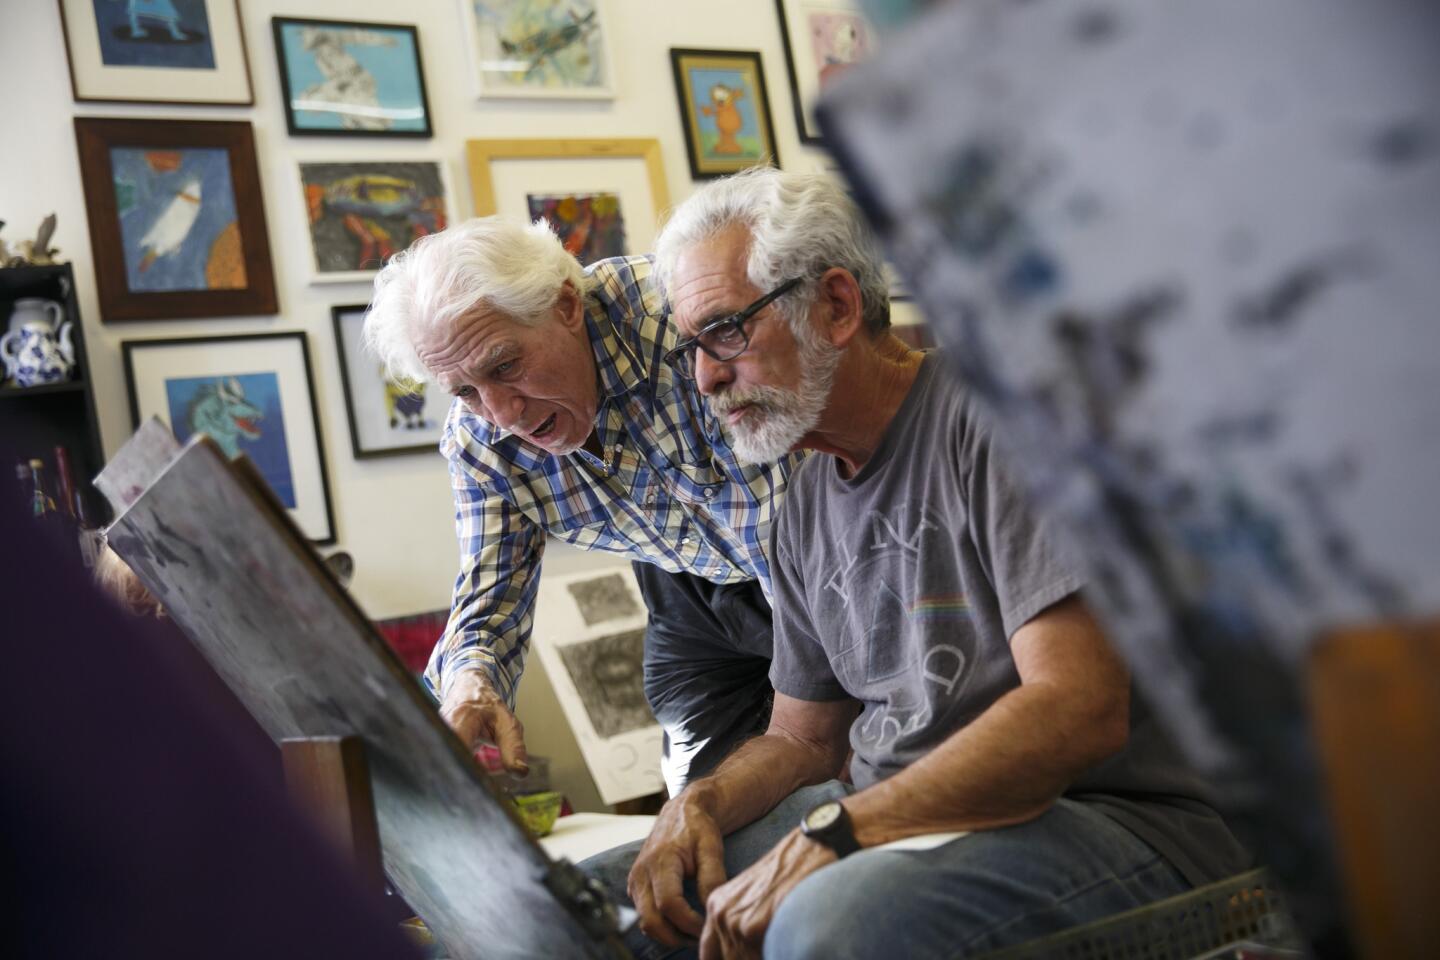 Paul Eventoff, left, helps Gary Silk with his art during a class at the Wizard of Art, which just celebrated its 20th anniversary in Los Feliz.